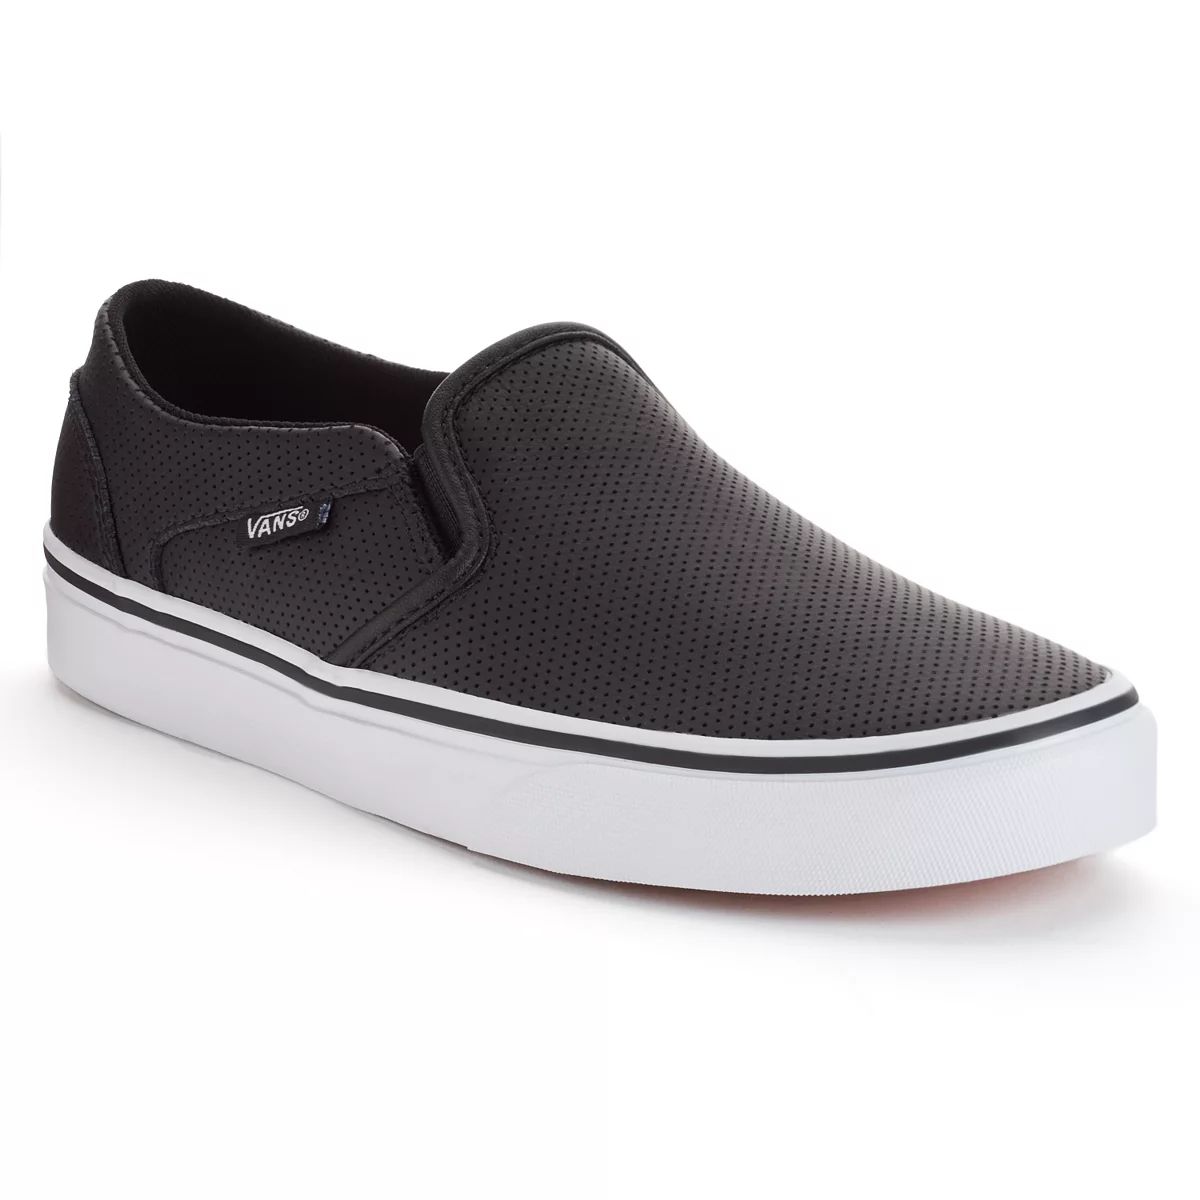 Vans® Asher Women's Perforated Slip-On Shoes | Kohl's